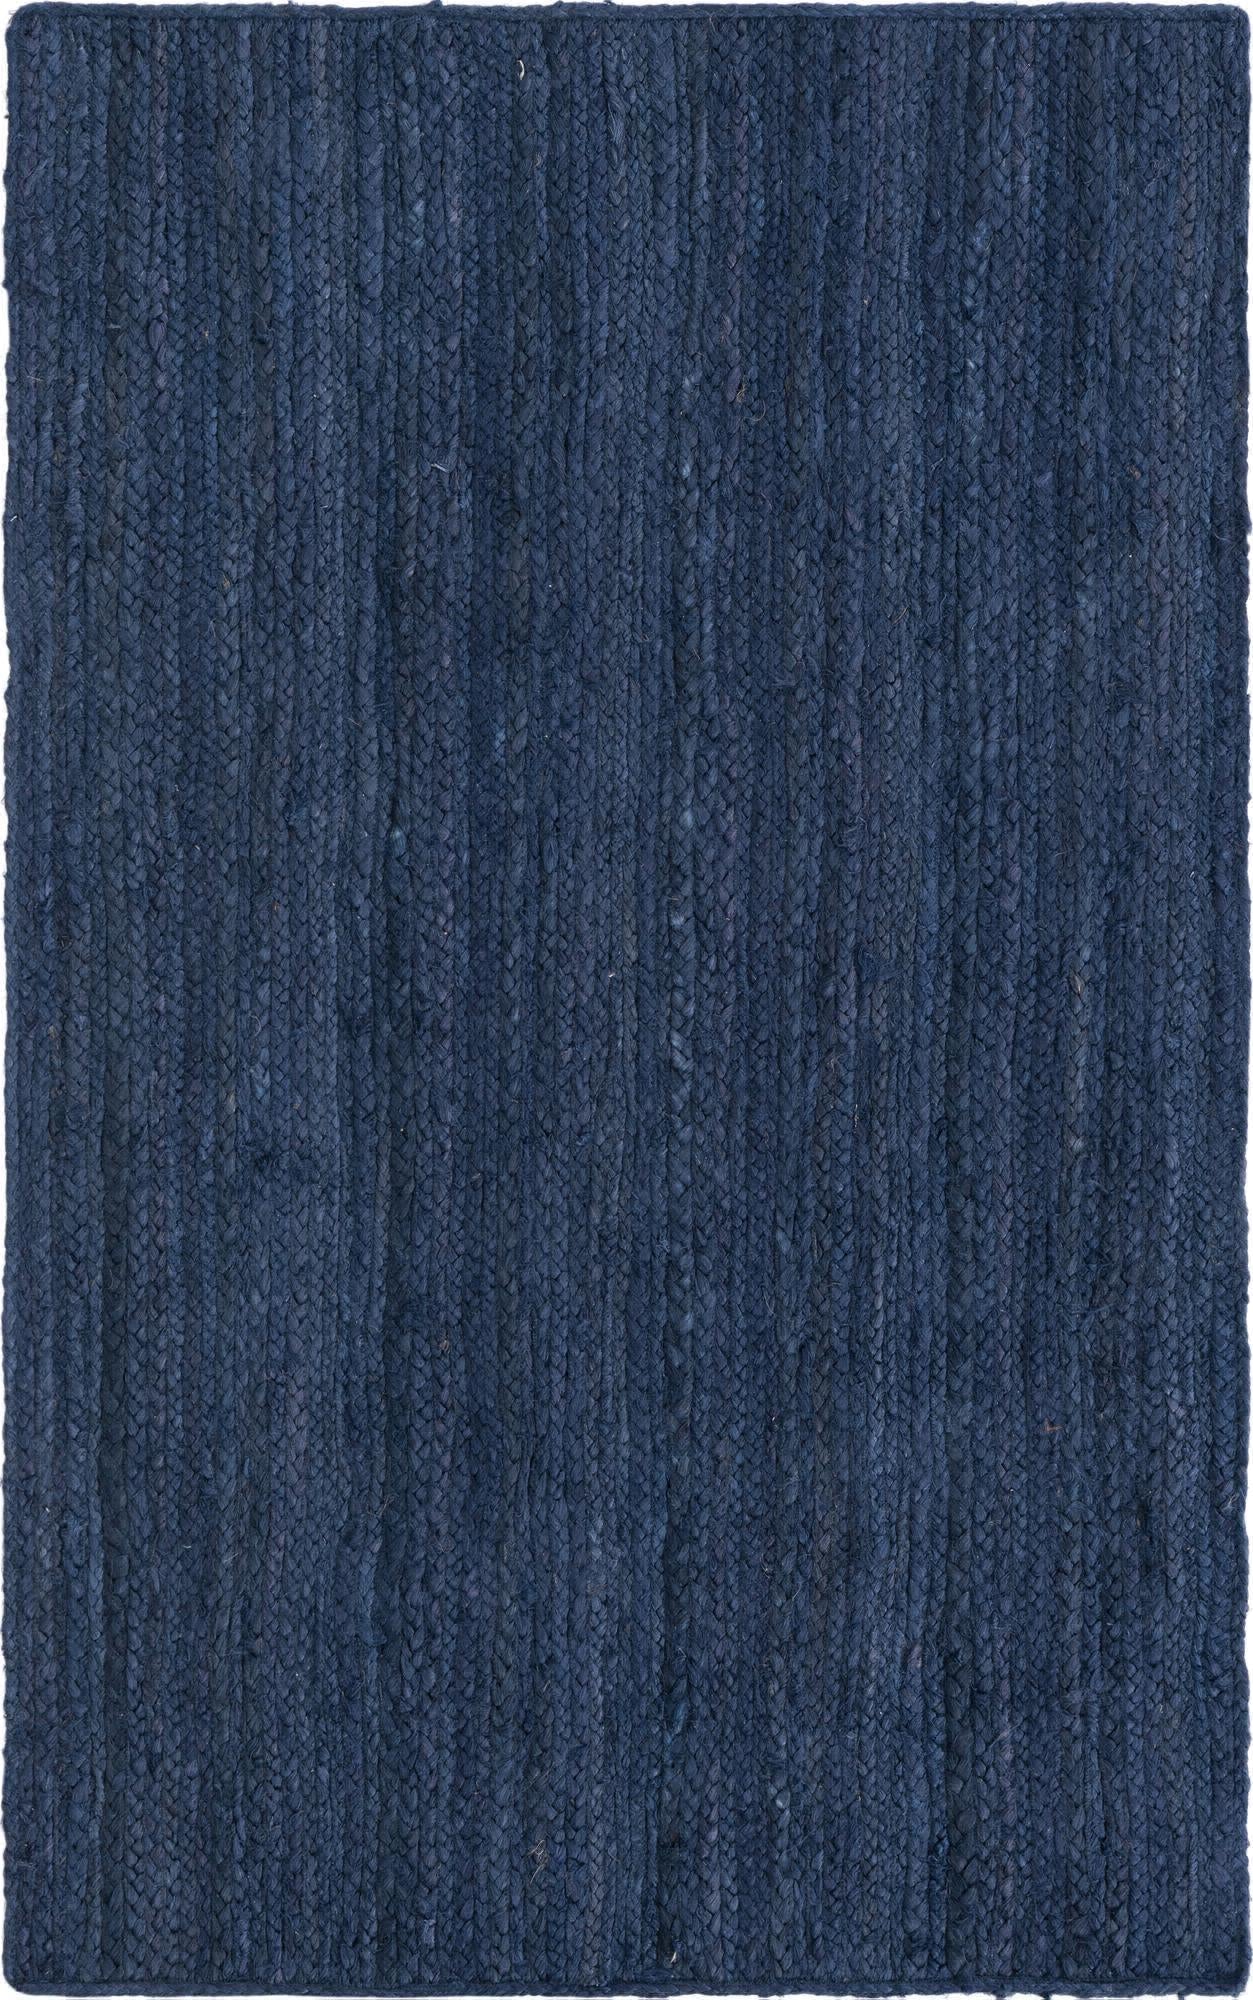 Unique Loom Braided Jute MGN-5-7-8 Navy Blue Area Rug main image